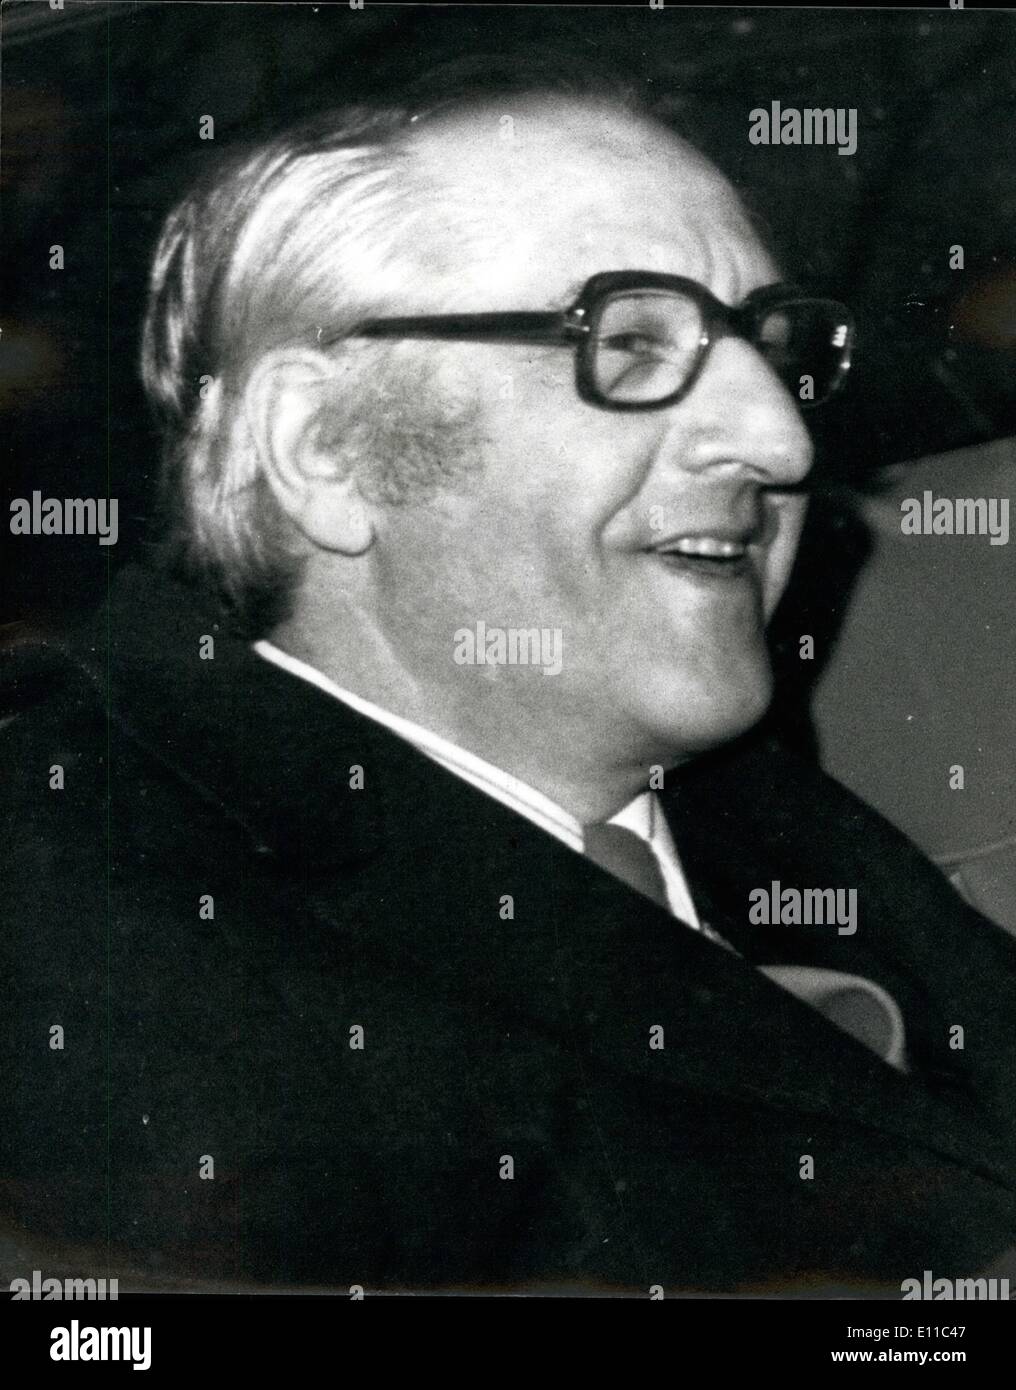 Jan. 01, 1977 - Attorney General Mr. Silkin At The Law Courts: Attorniey General Mr. Sam Silkin, QC, was again appearing before Stock Photo